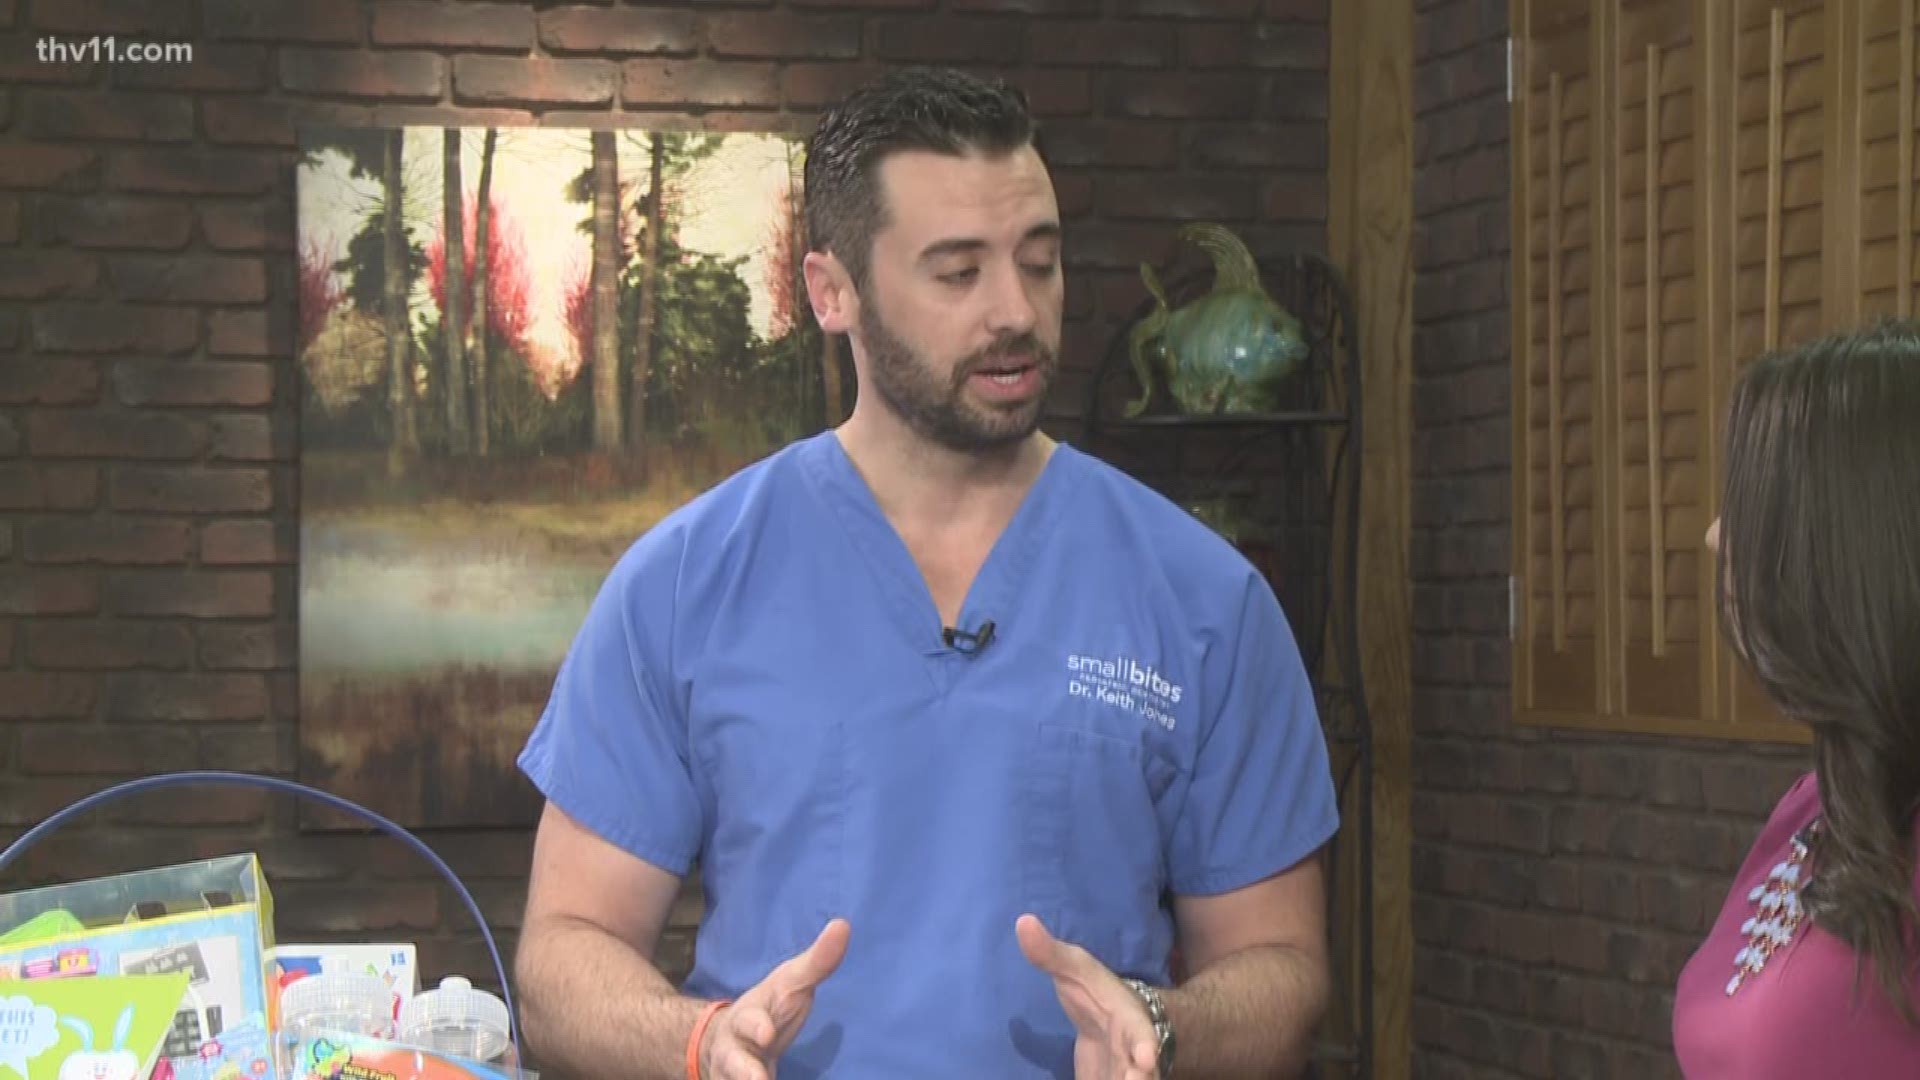 Easter candy is coming, Dr. Keith Jones with Small Bites has advice for kids to stay healthy.